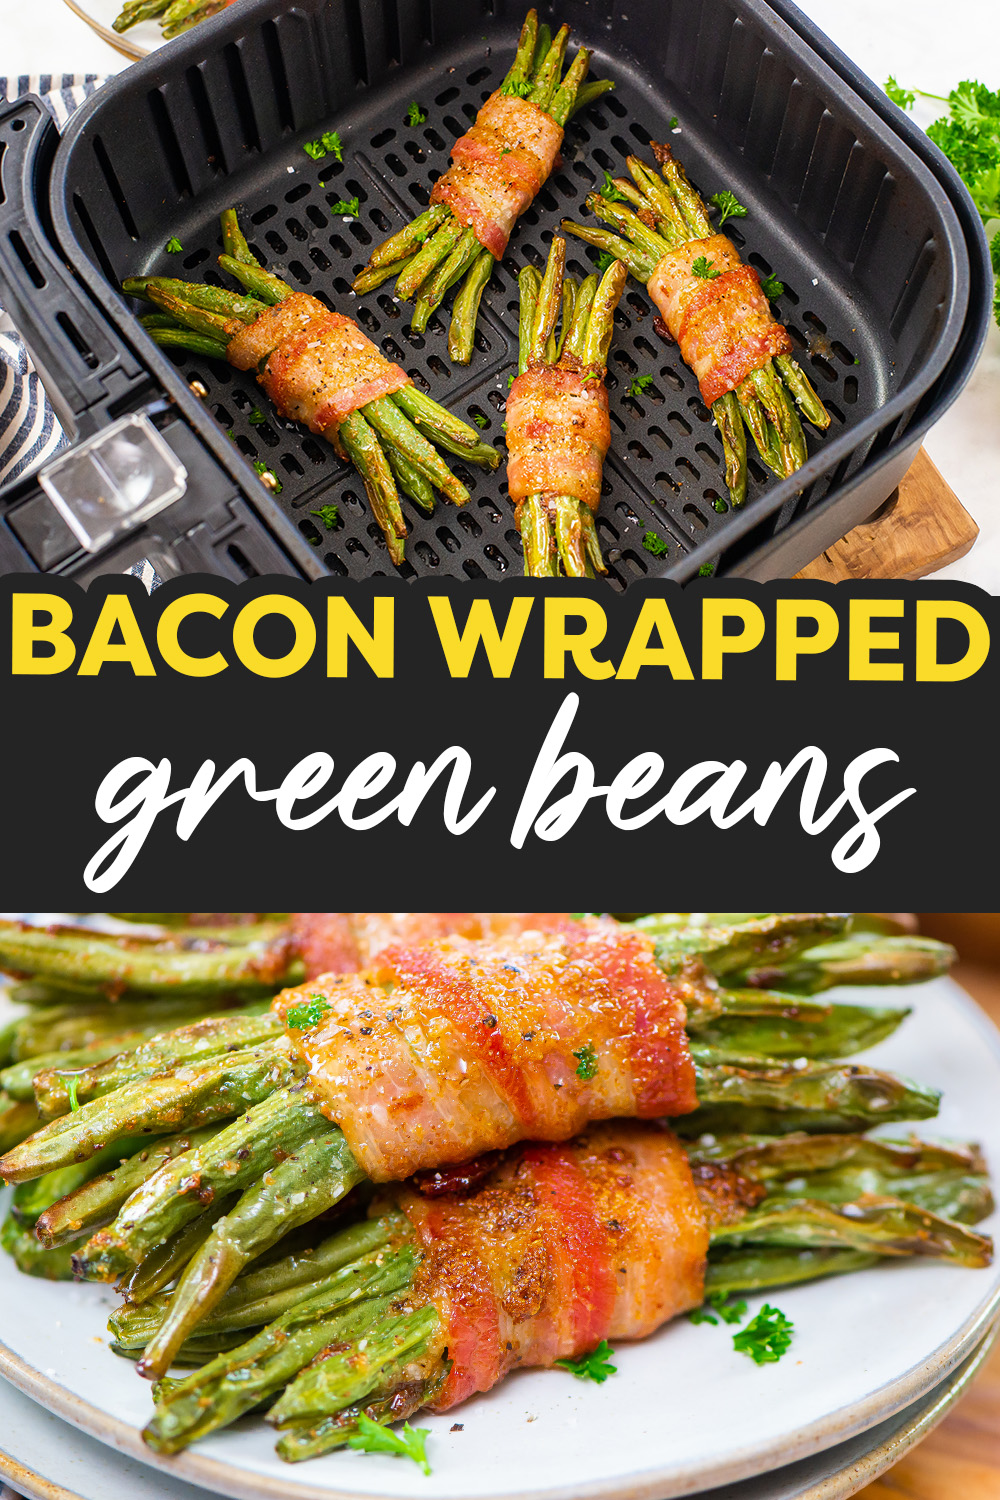 The air fryer makes these bacon wrapped green beans have crisp bacon, crisp green beans, and does it so simply!